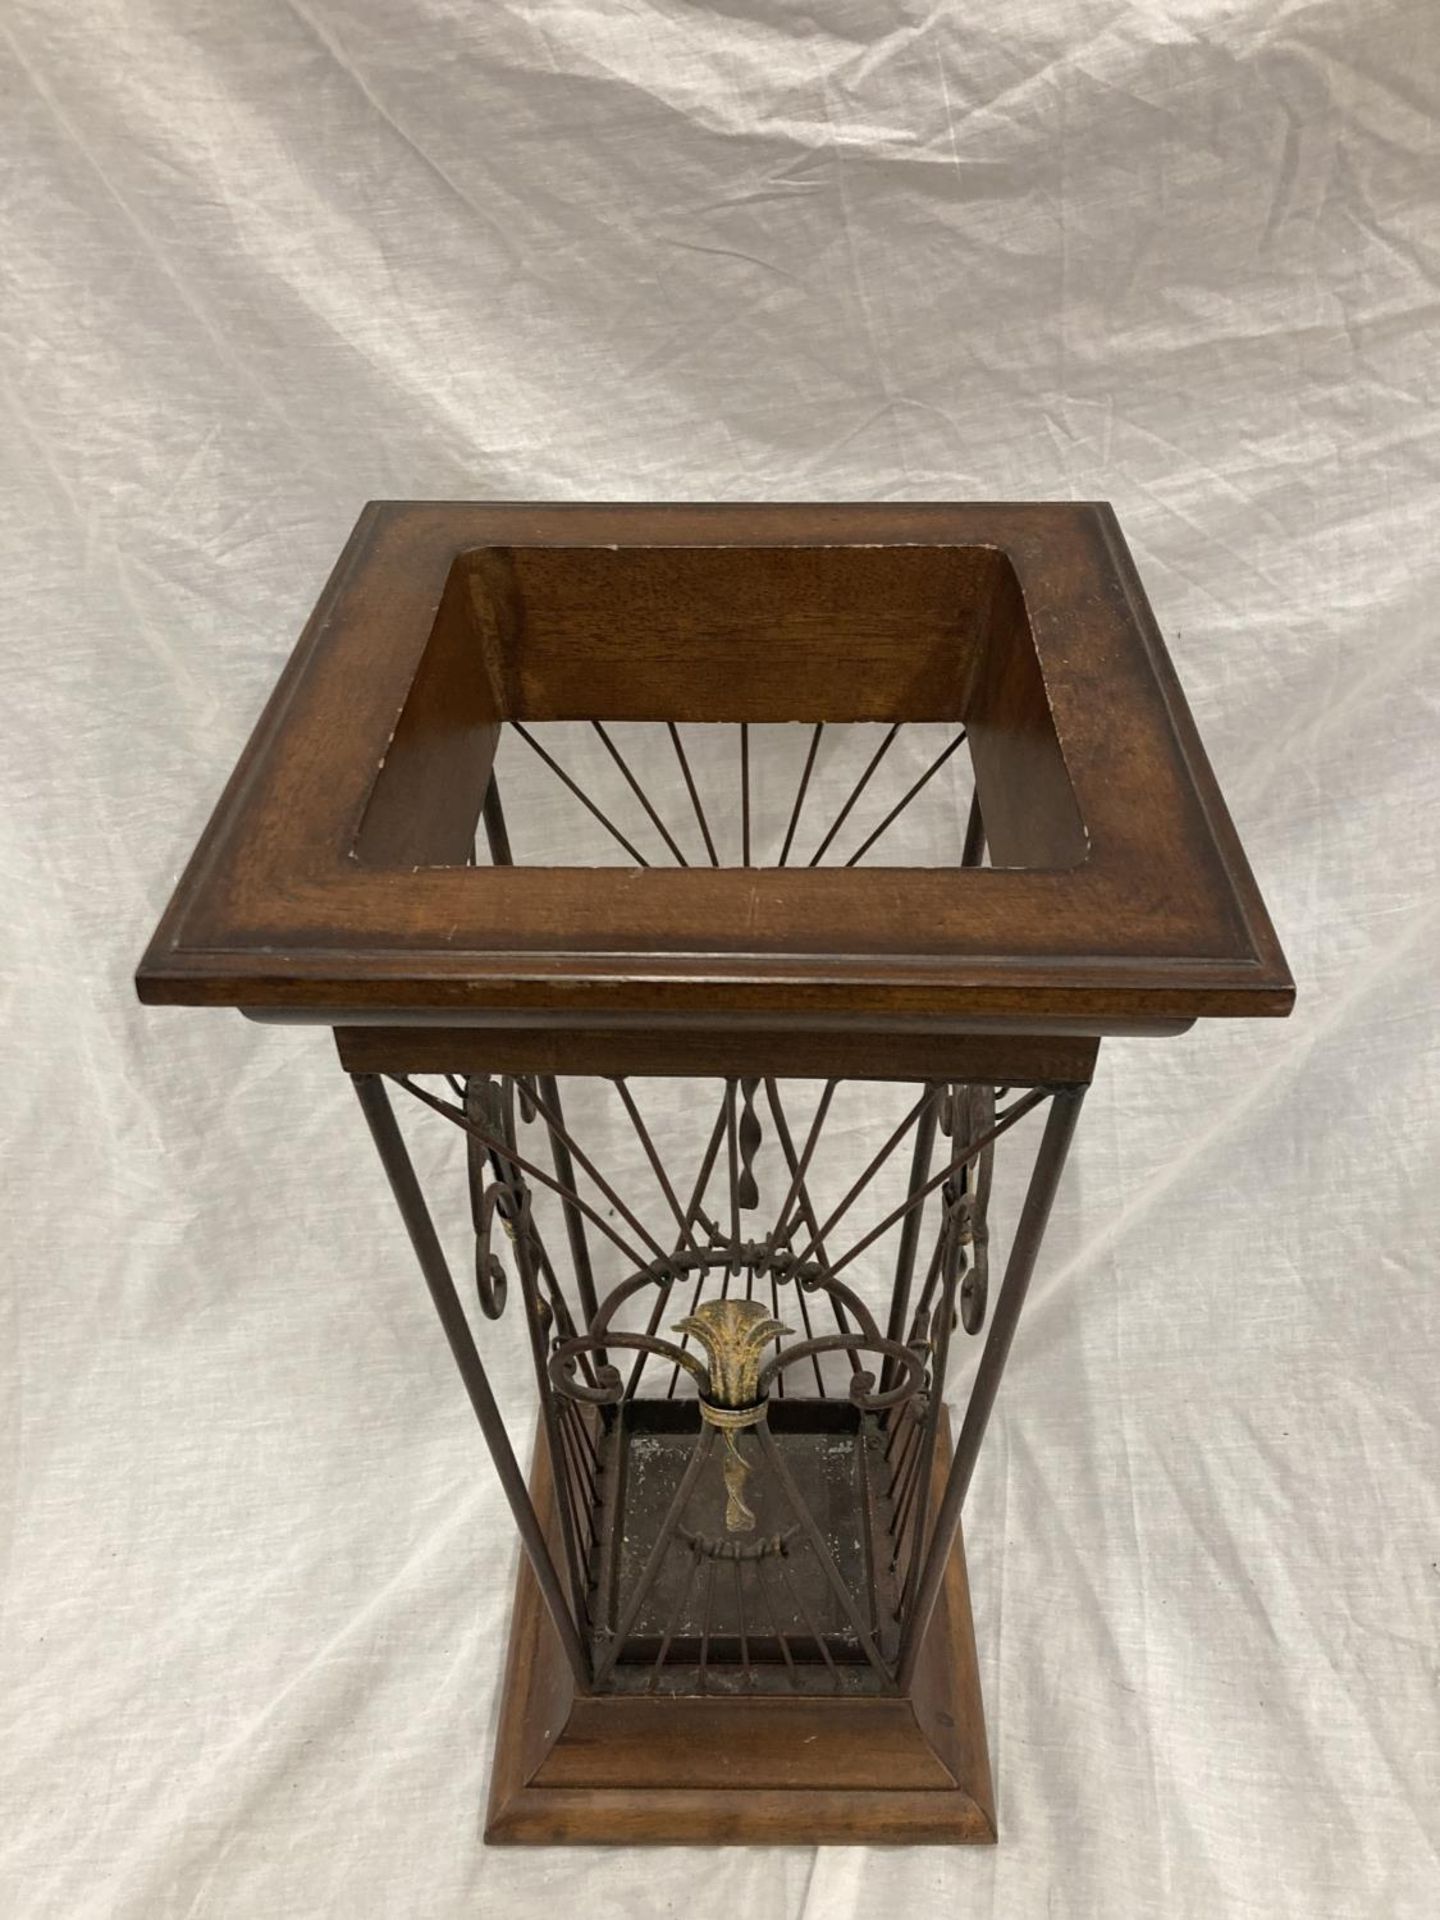 A VINTAGE STYLE WOOD AND WROUGHT IRON UMBRELLA STAND - Image 2 of 5